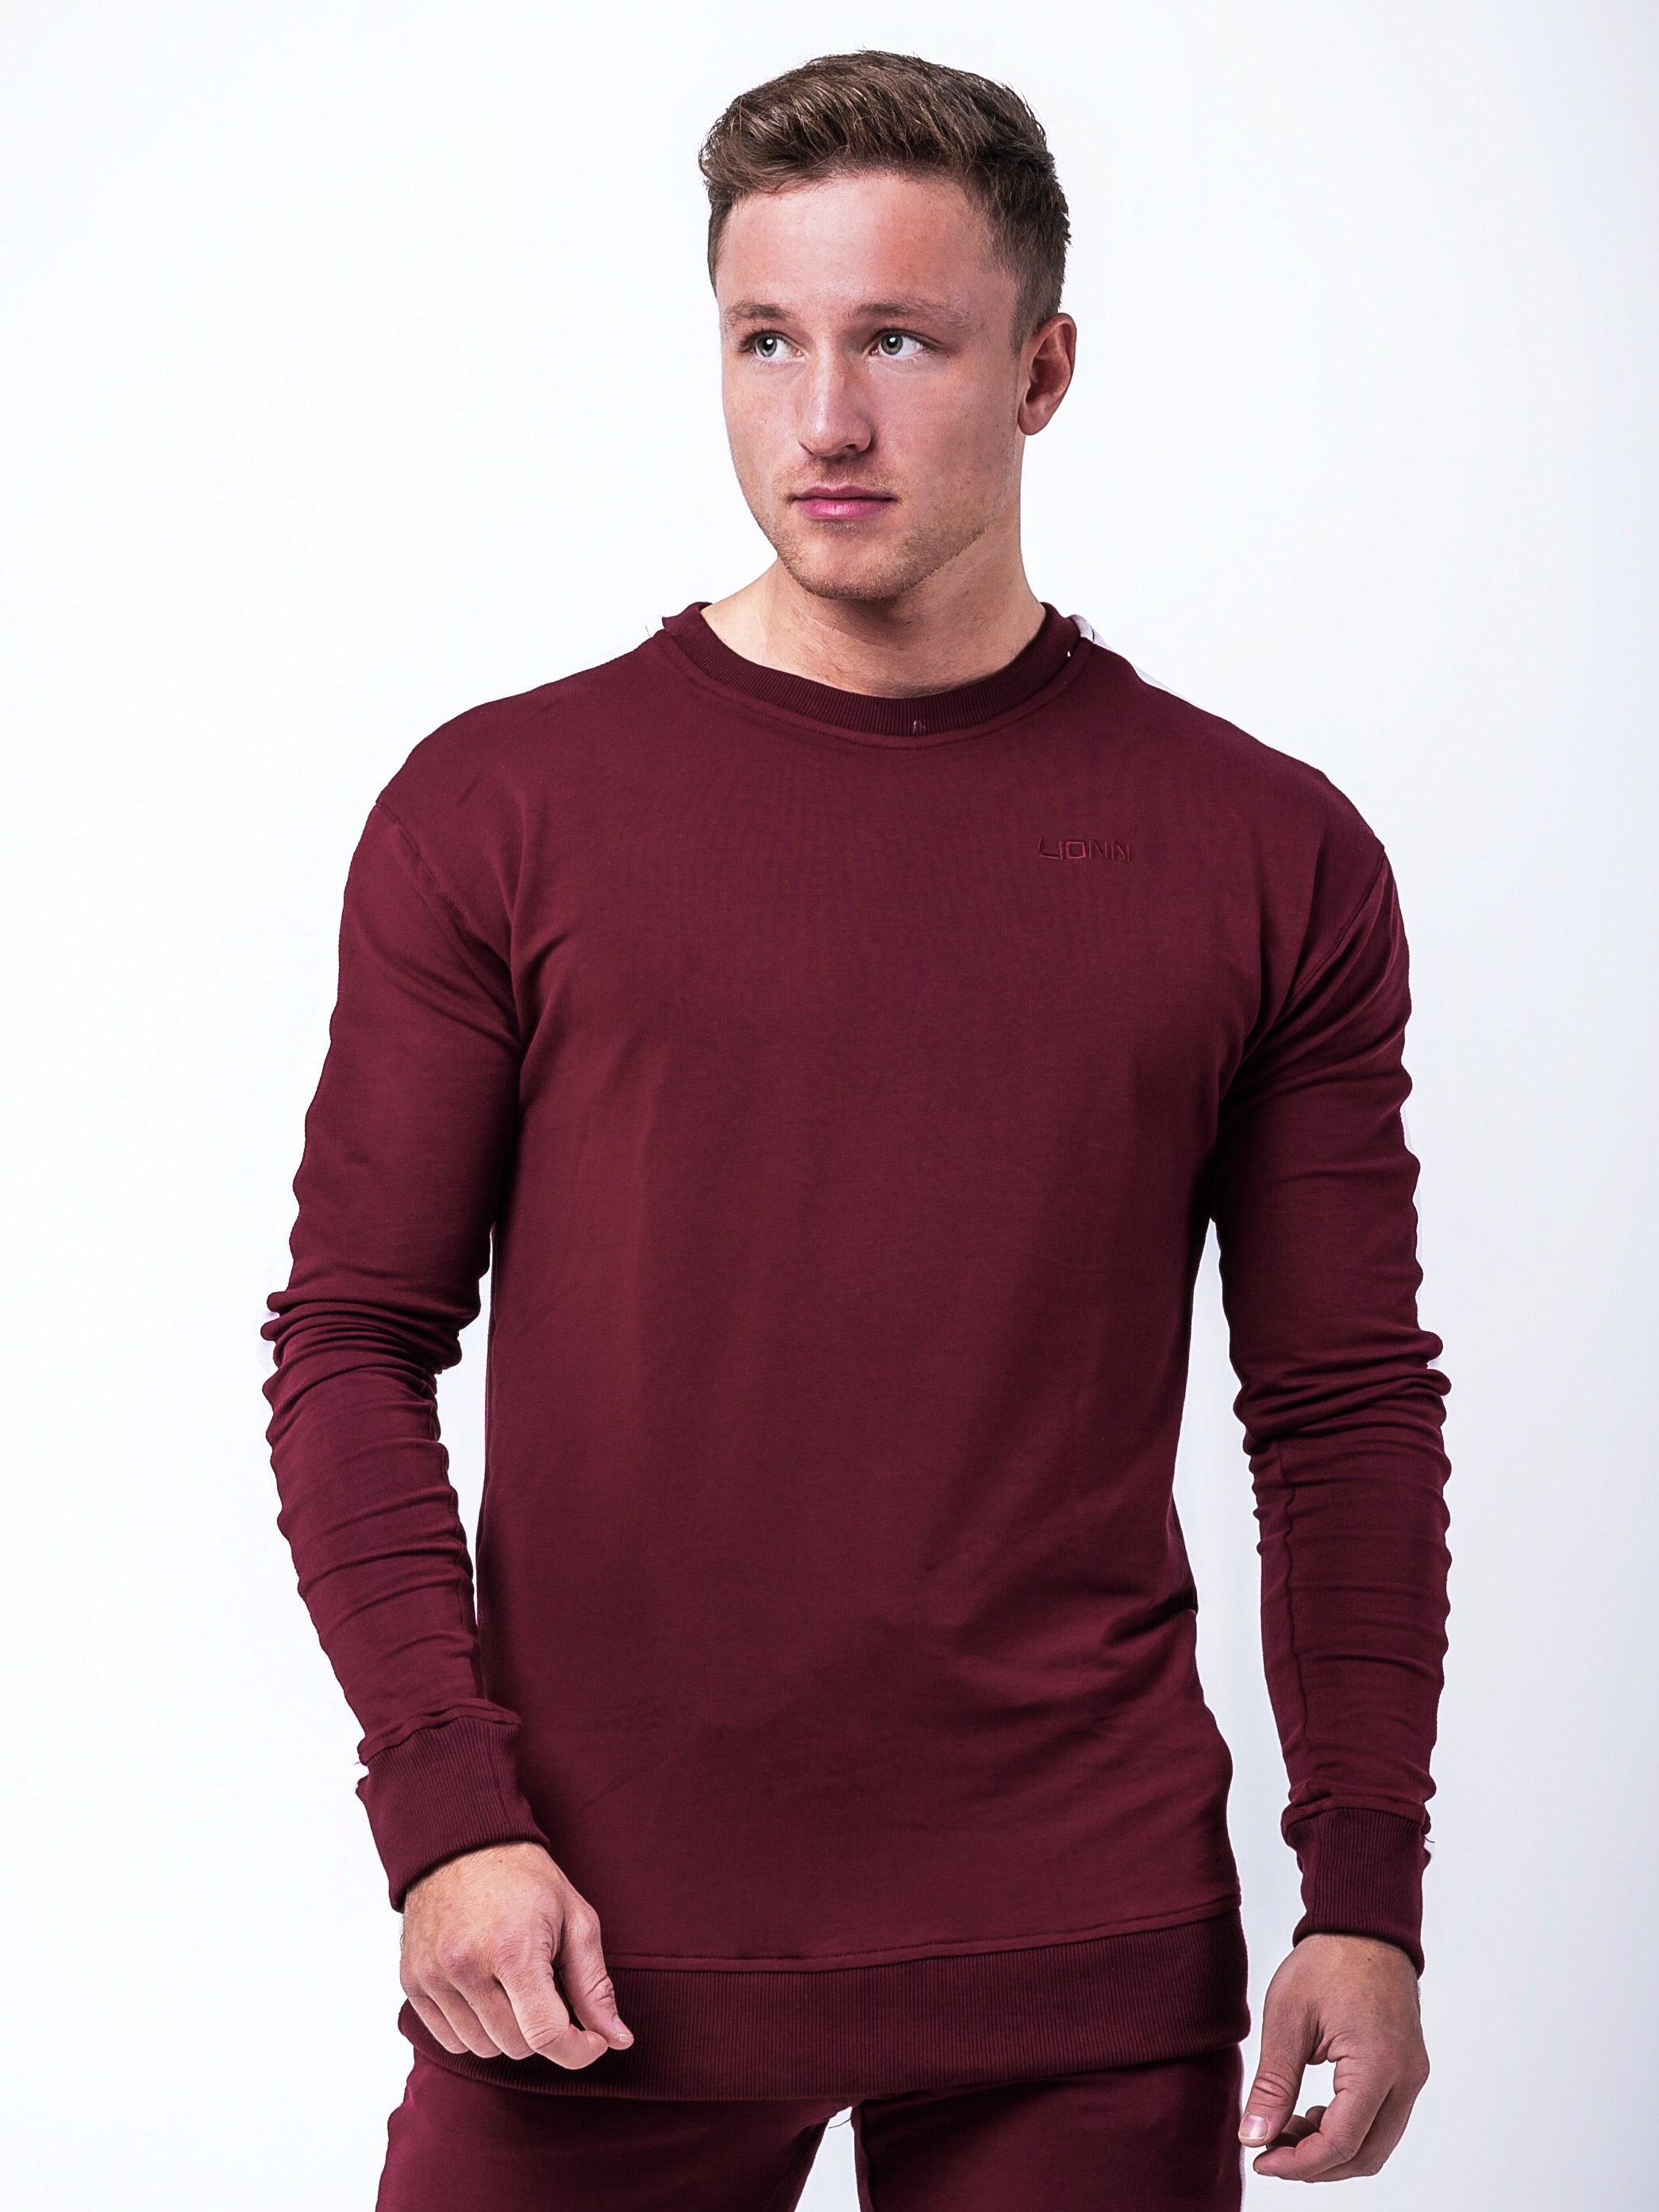 Fitted Side Panel Sweatshirt Maroon and White – Lionn